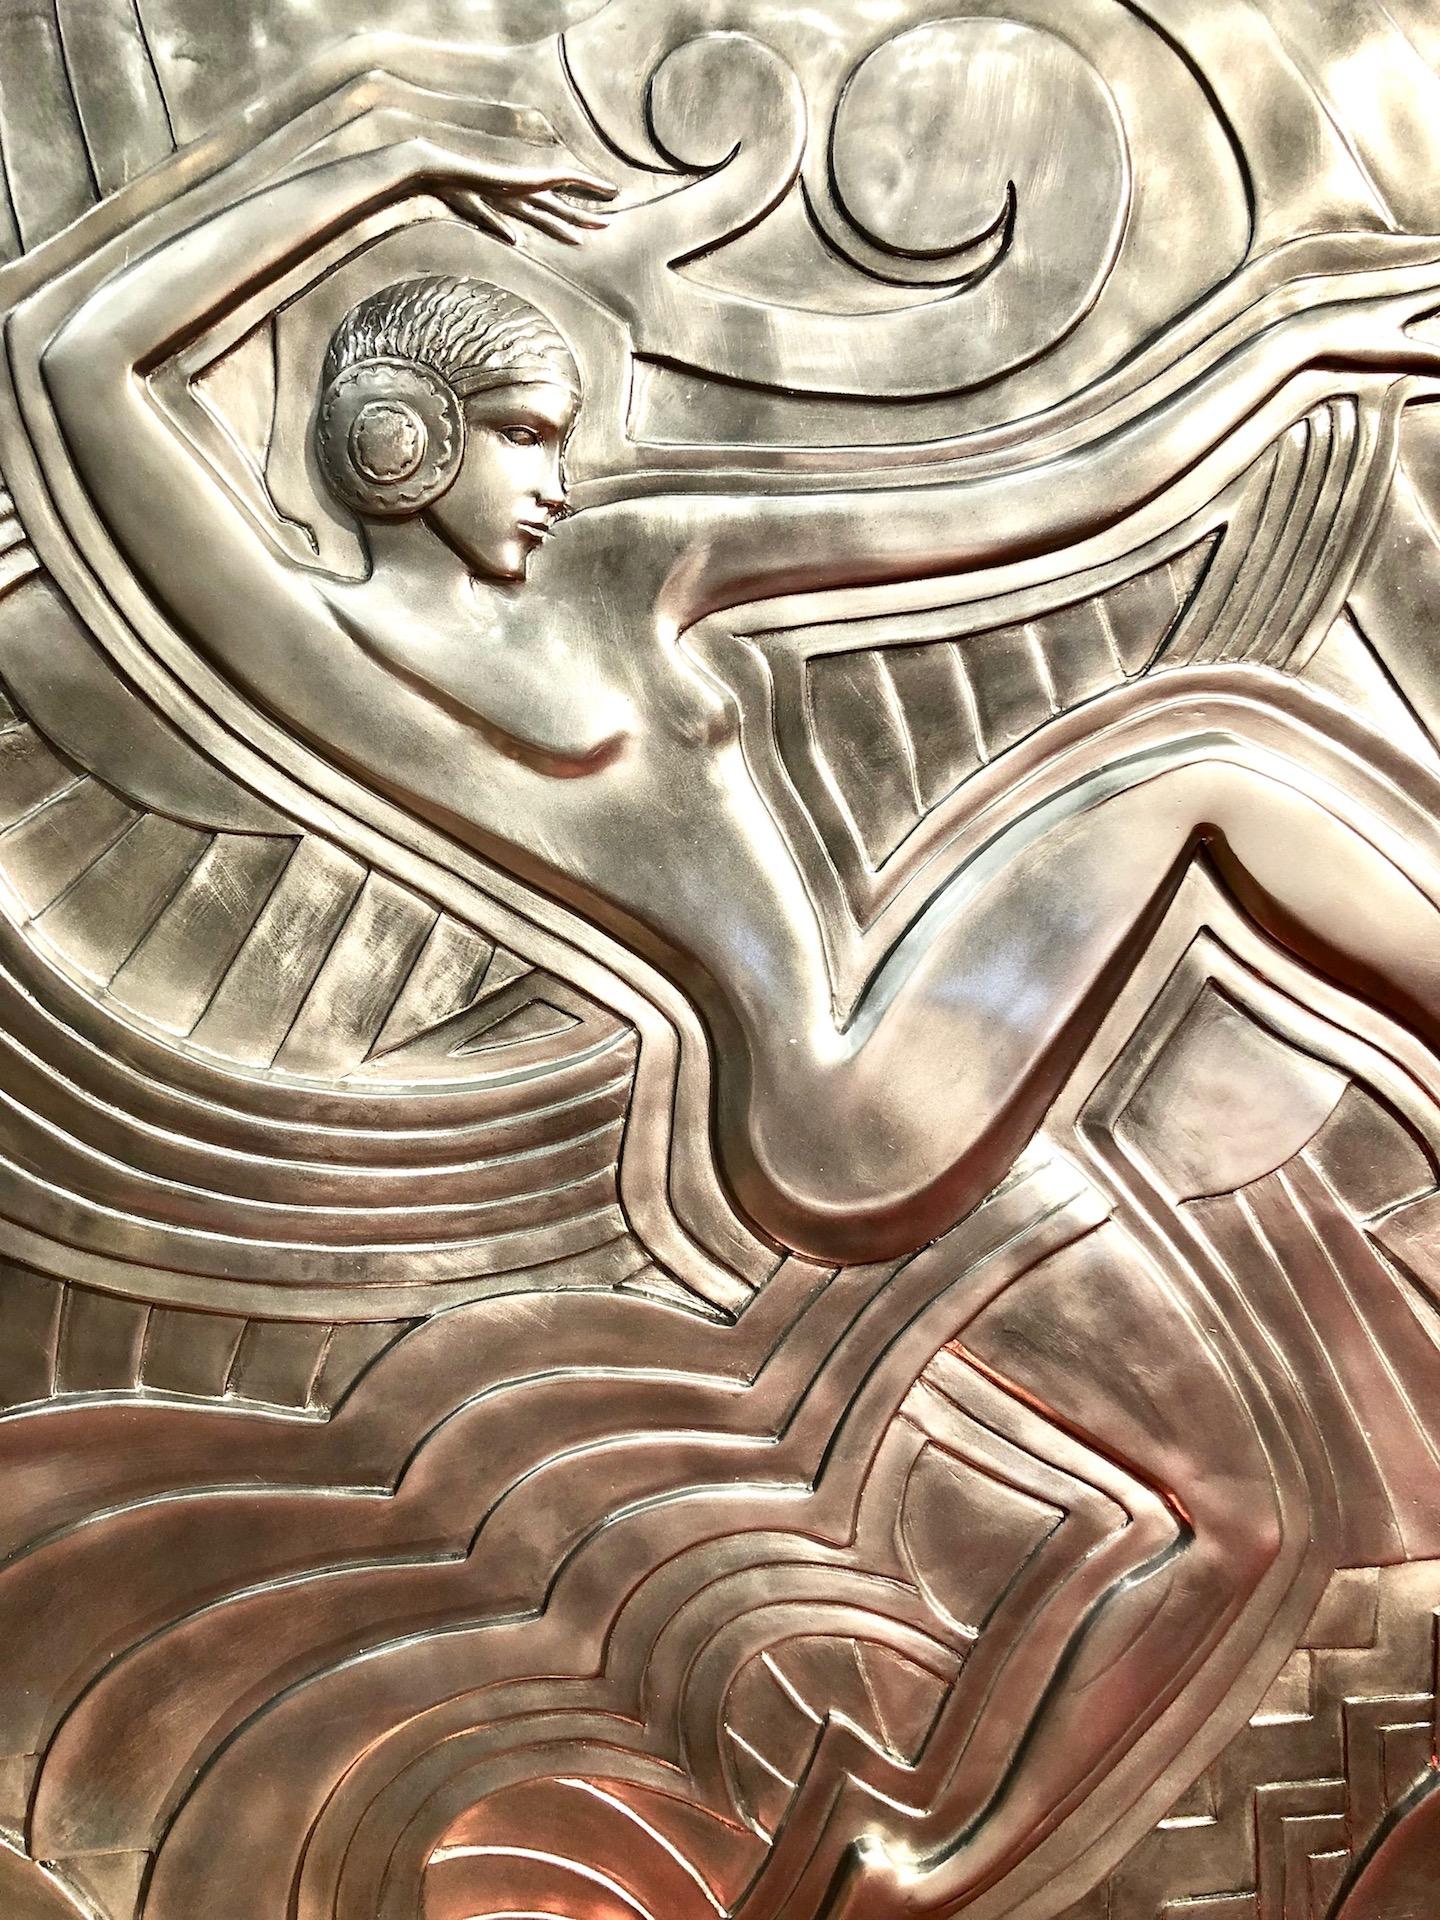 Silver colored wall plaque made after the model that decorates the facade of the revue theater “Folies Bergère” in Paris. This meter-high relief dates from 1926, by the French architect and designer “Maurice Picaud”, called “Pico”. The depicted